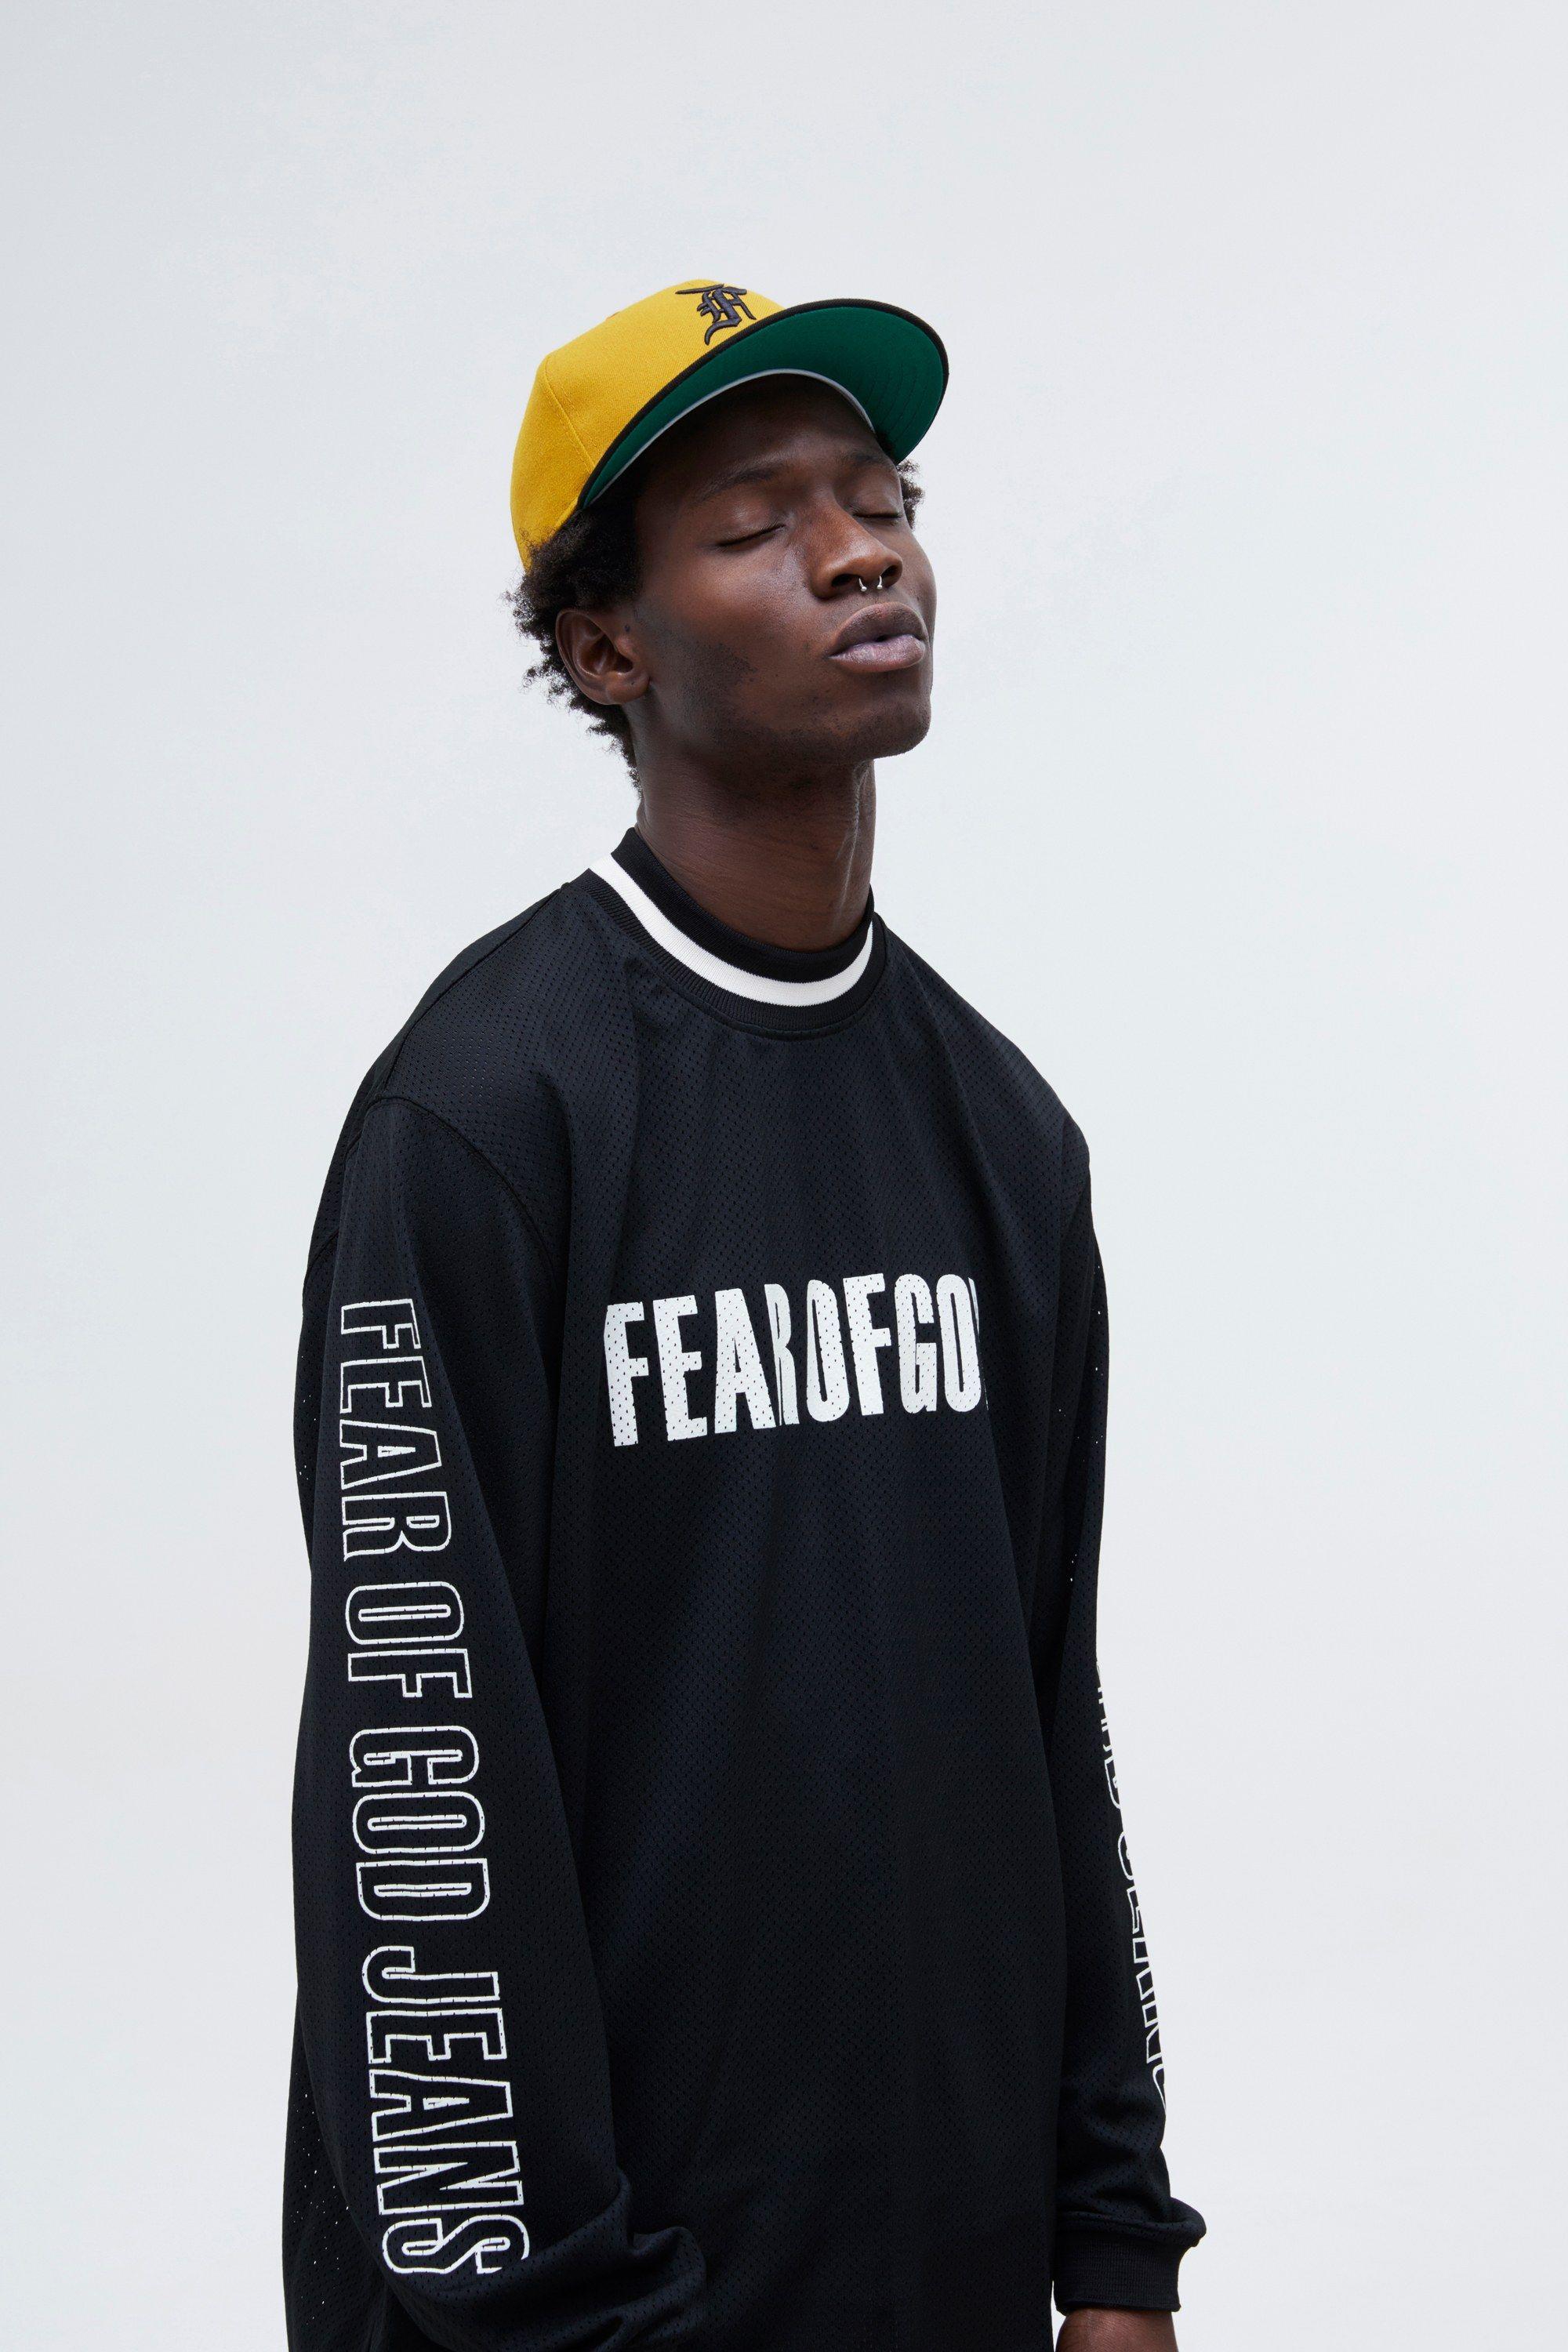 Fear of God Hat Logo - Fear of God Fall 2017 Menswear Collection - Vogue